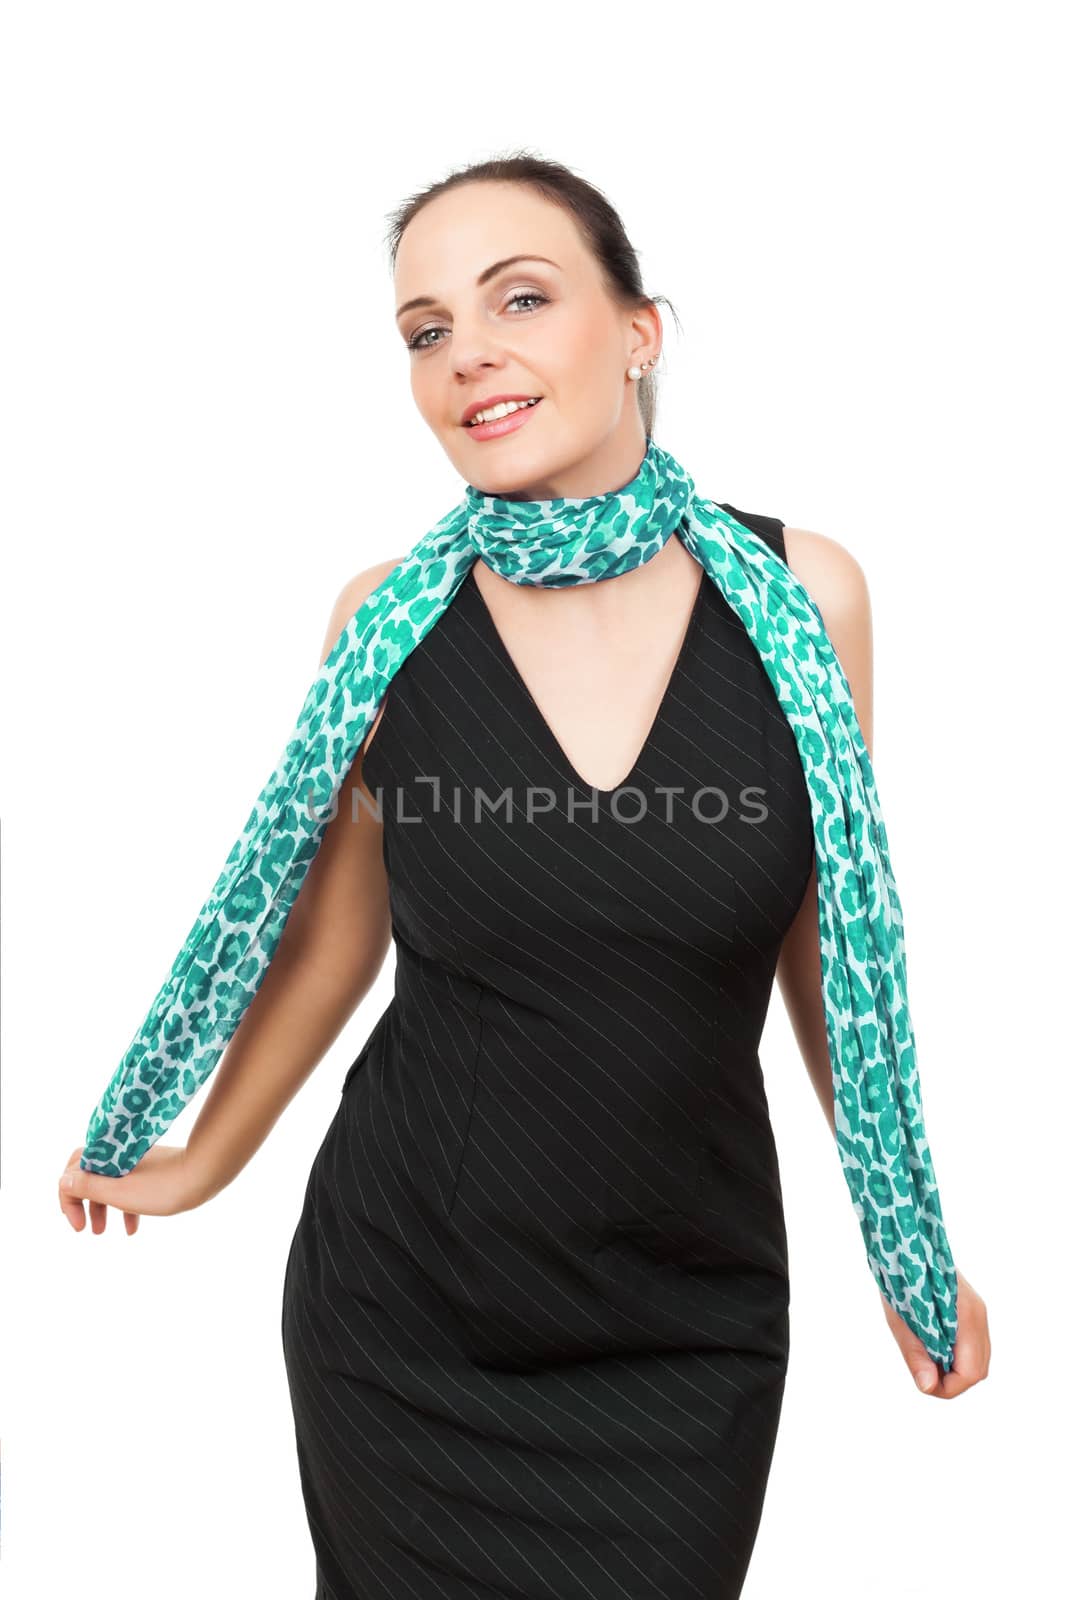 An image of a woman with a turquoise scarf